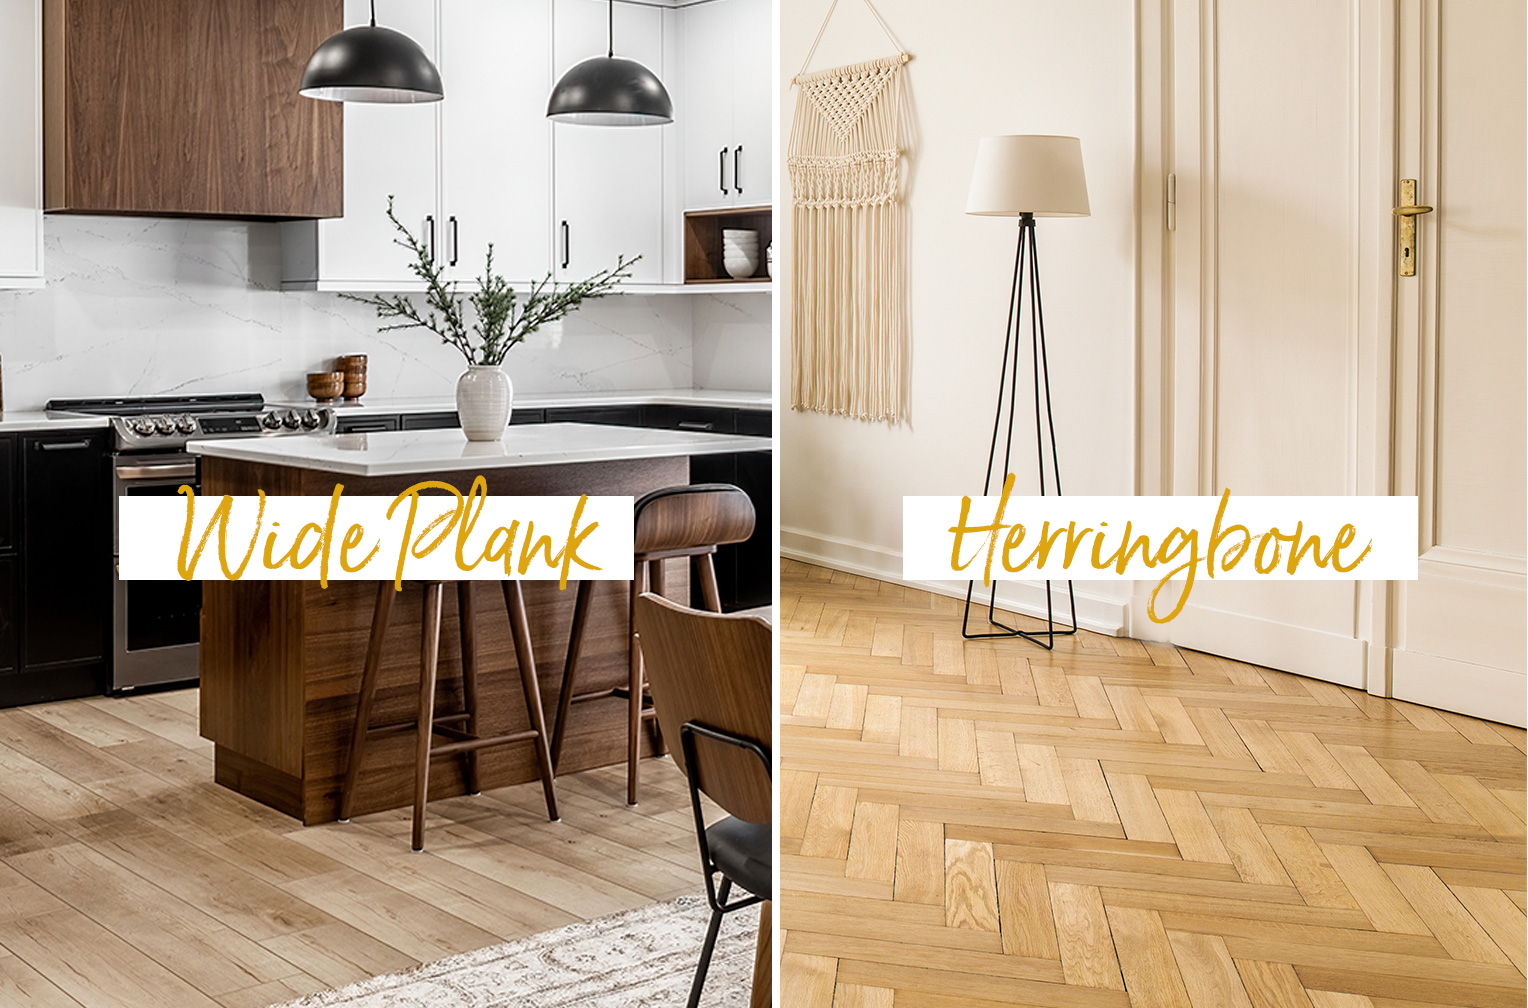 Tile Flooring Trends, Designs & Ideas for 2020 and Beyond